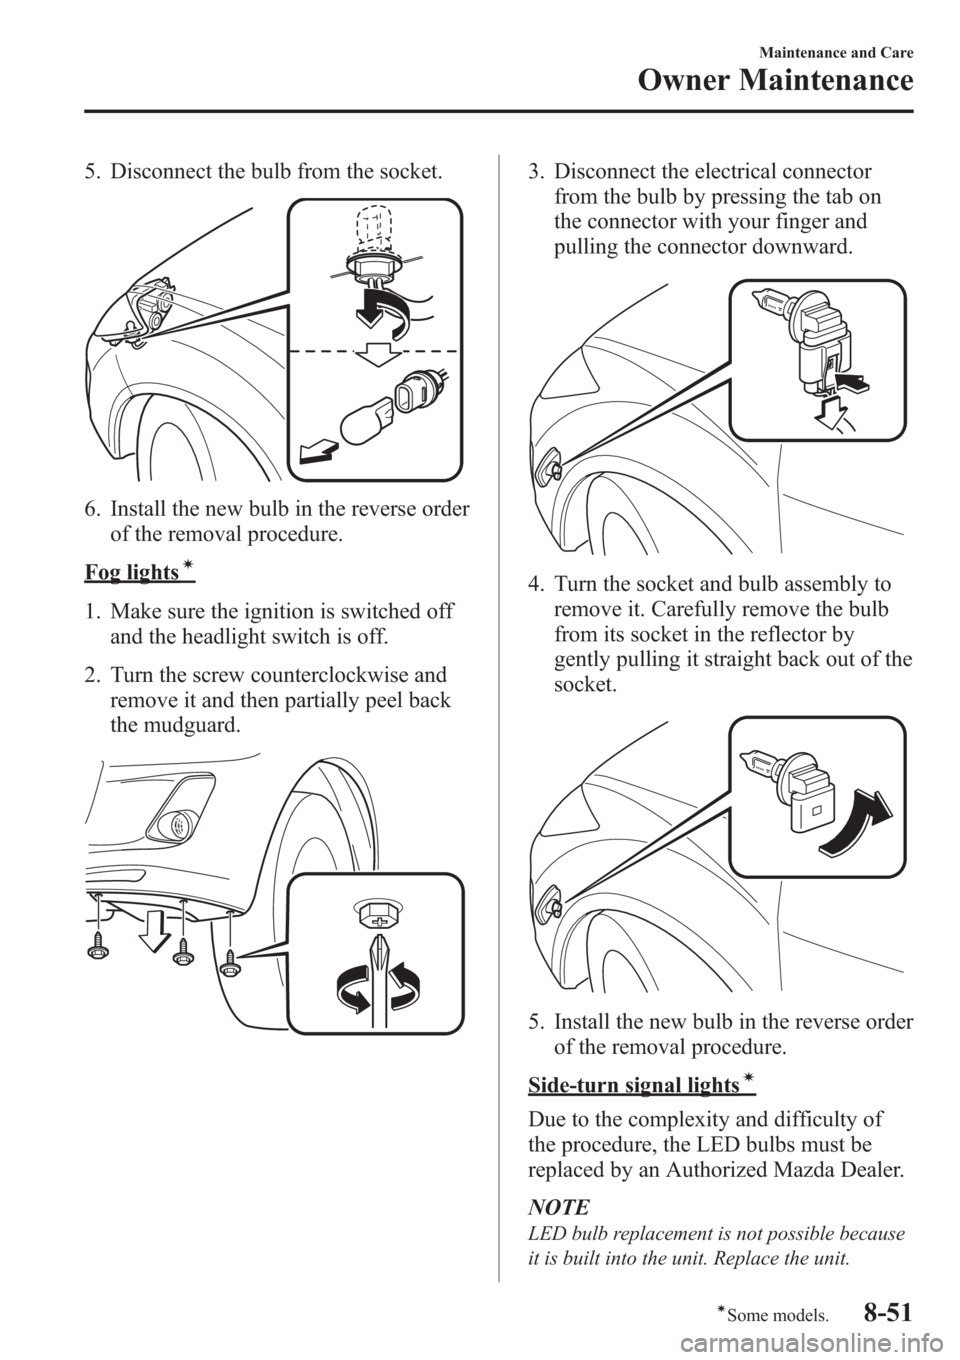 MAZDA MODEL 3 HATCHBACK 2013  Owners Manual (in English) 5. Disconnect the bulb from the socket.
6. Install the new bulb in the reverse order
of the removal procedure.
Fog lightsí
1. Make sure the ignition is switched off
and the headlight switch is off.
2